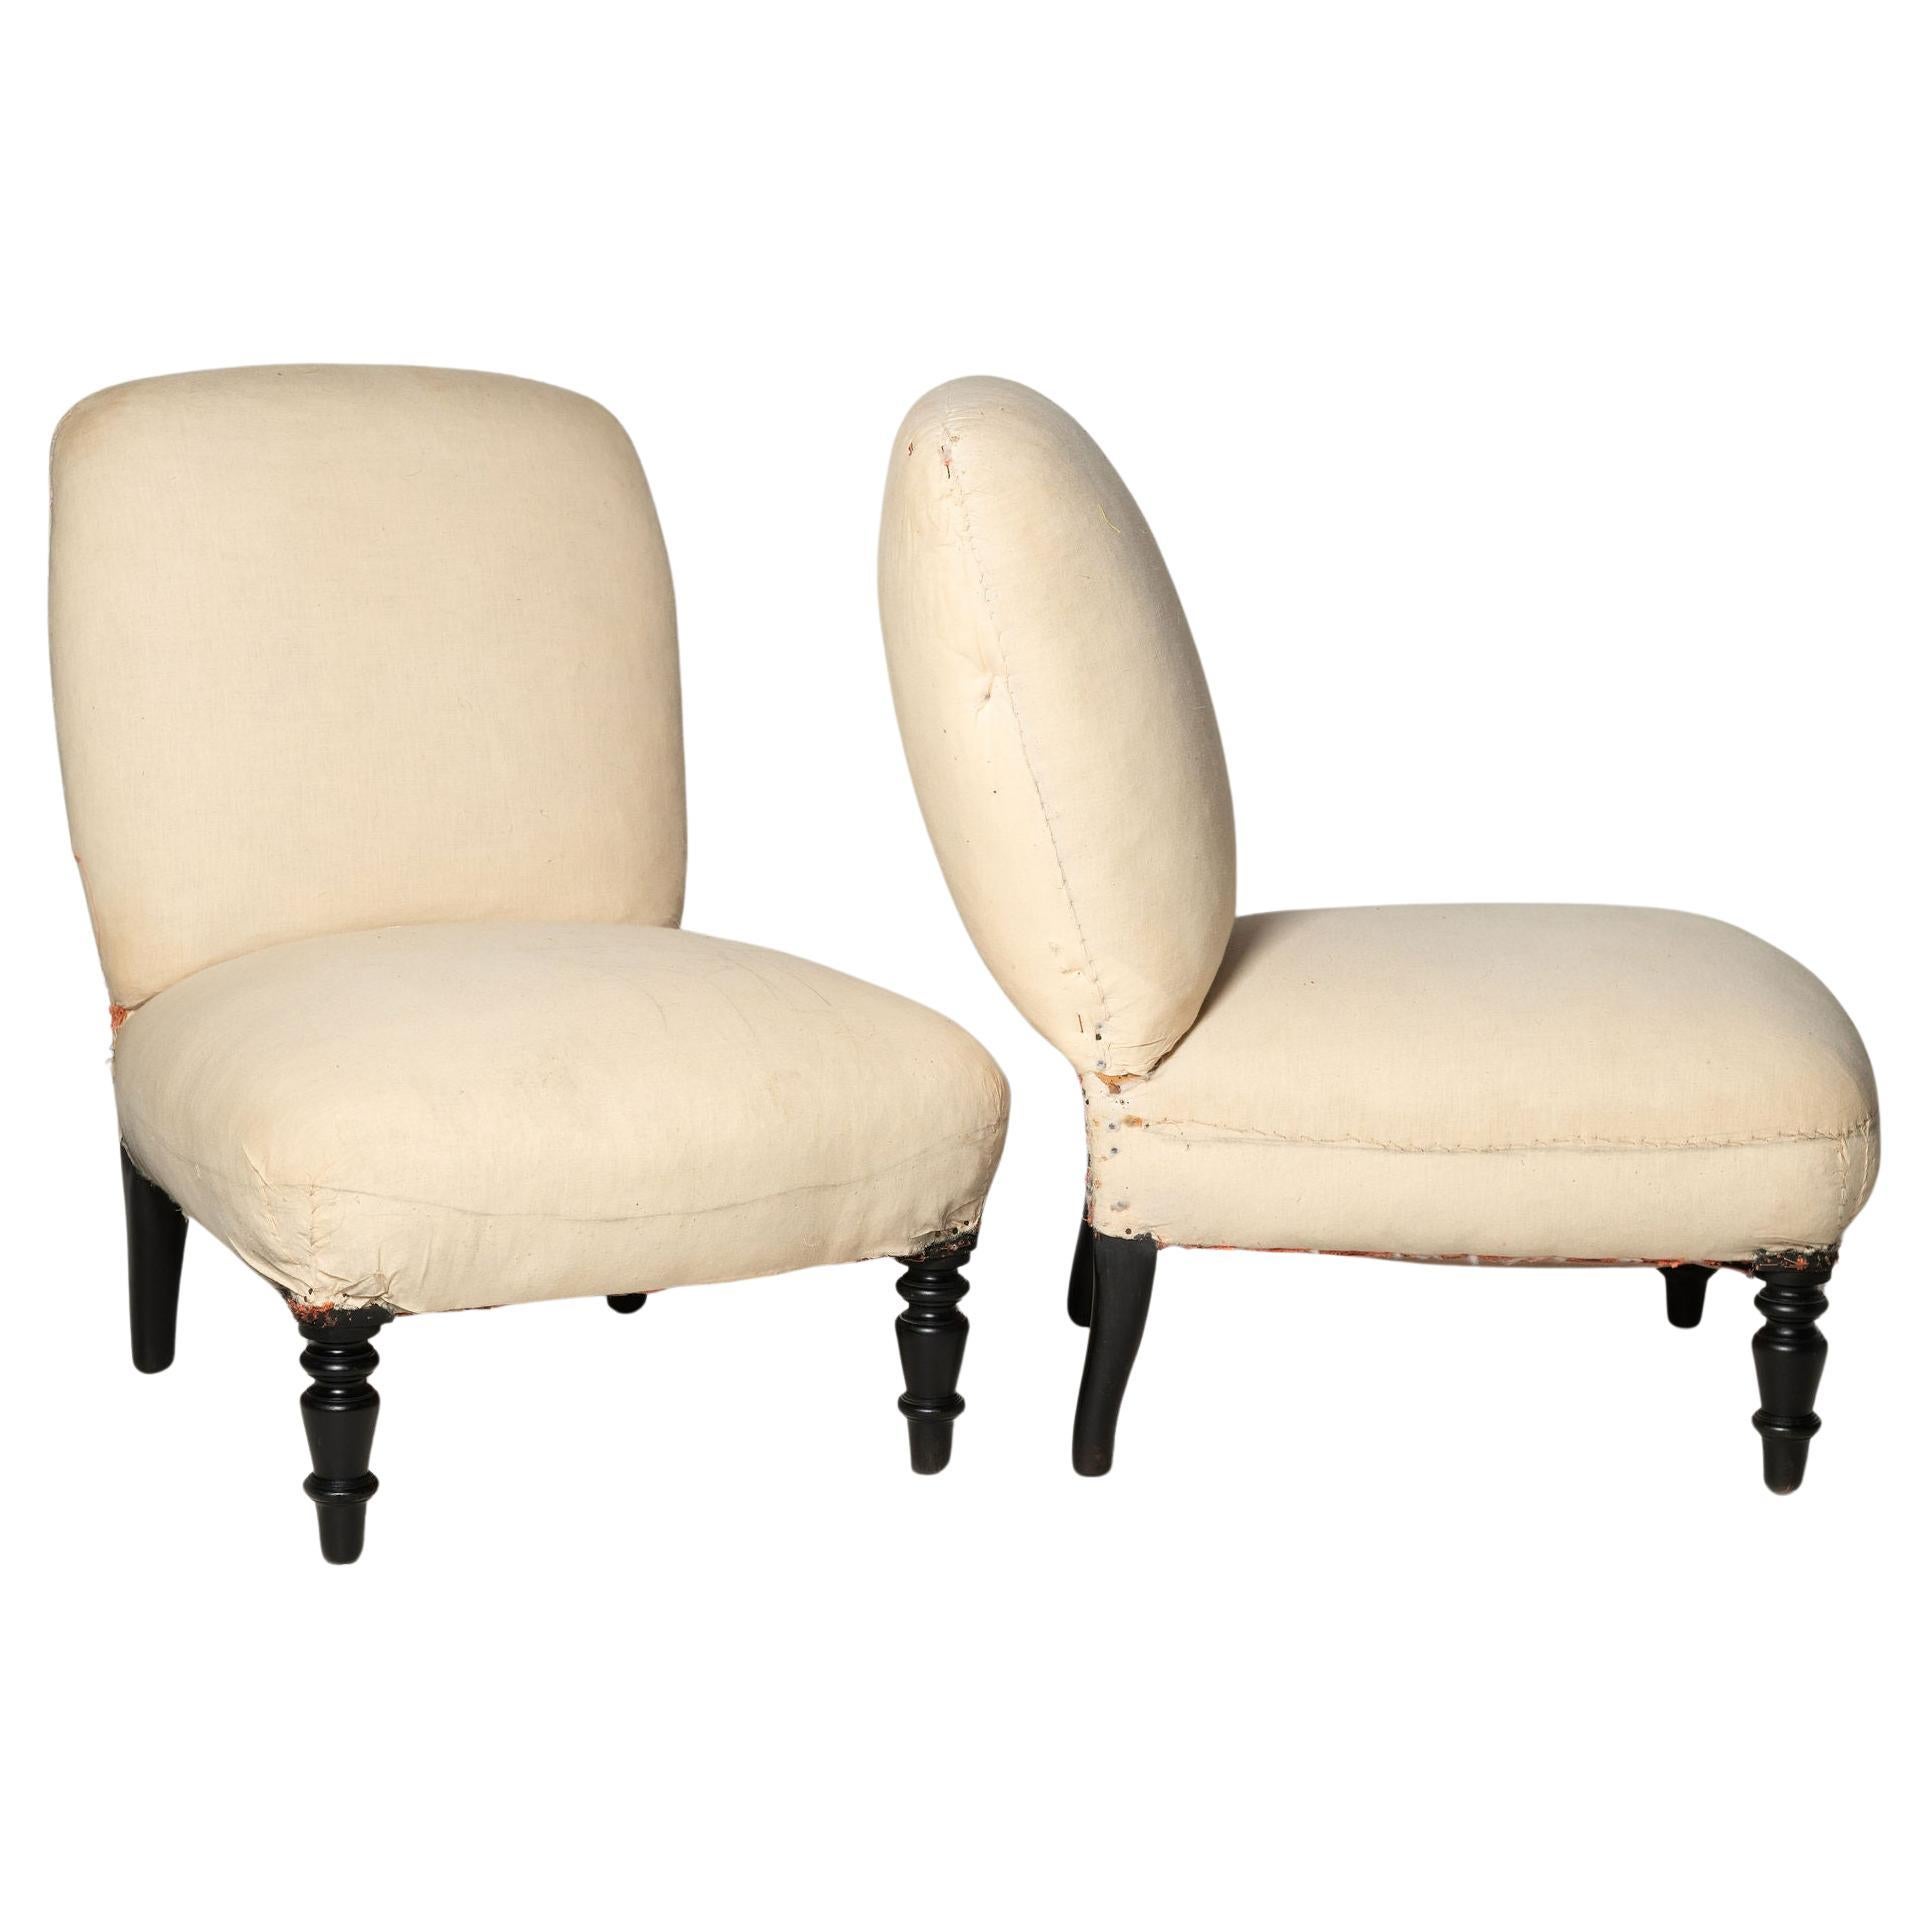 Antique French pair of slipper chairs, for upholstery, fireside, bedroom chairs 